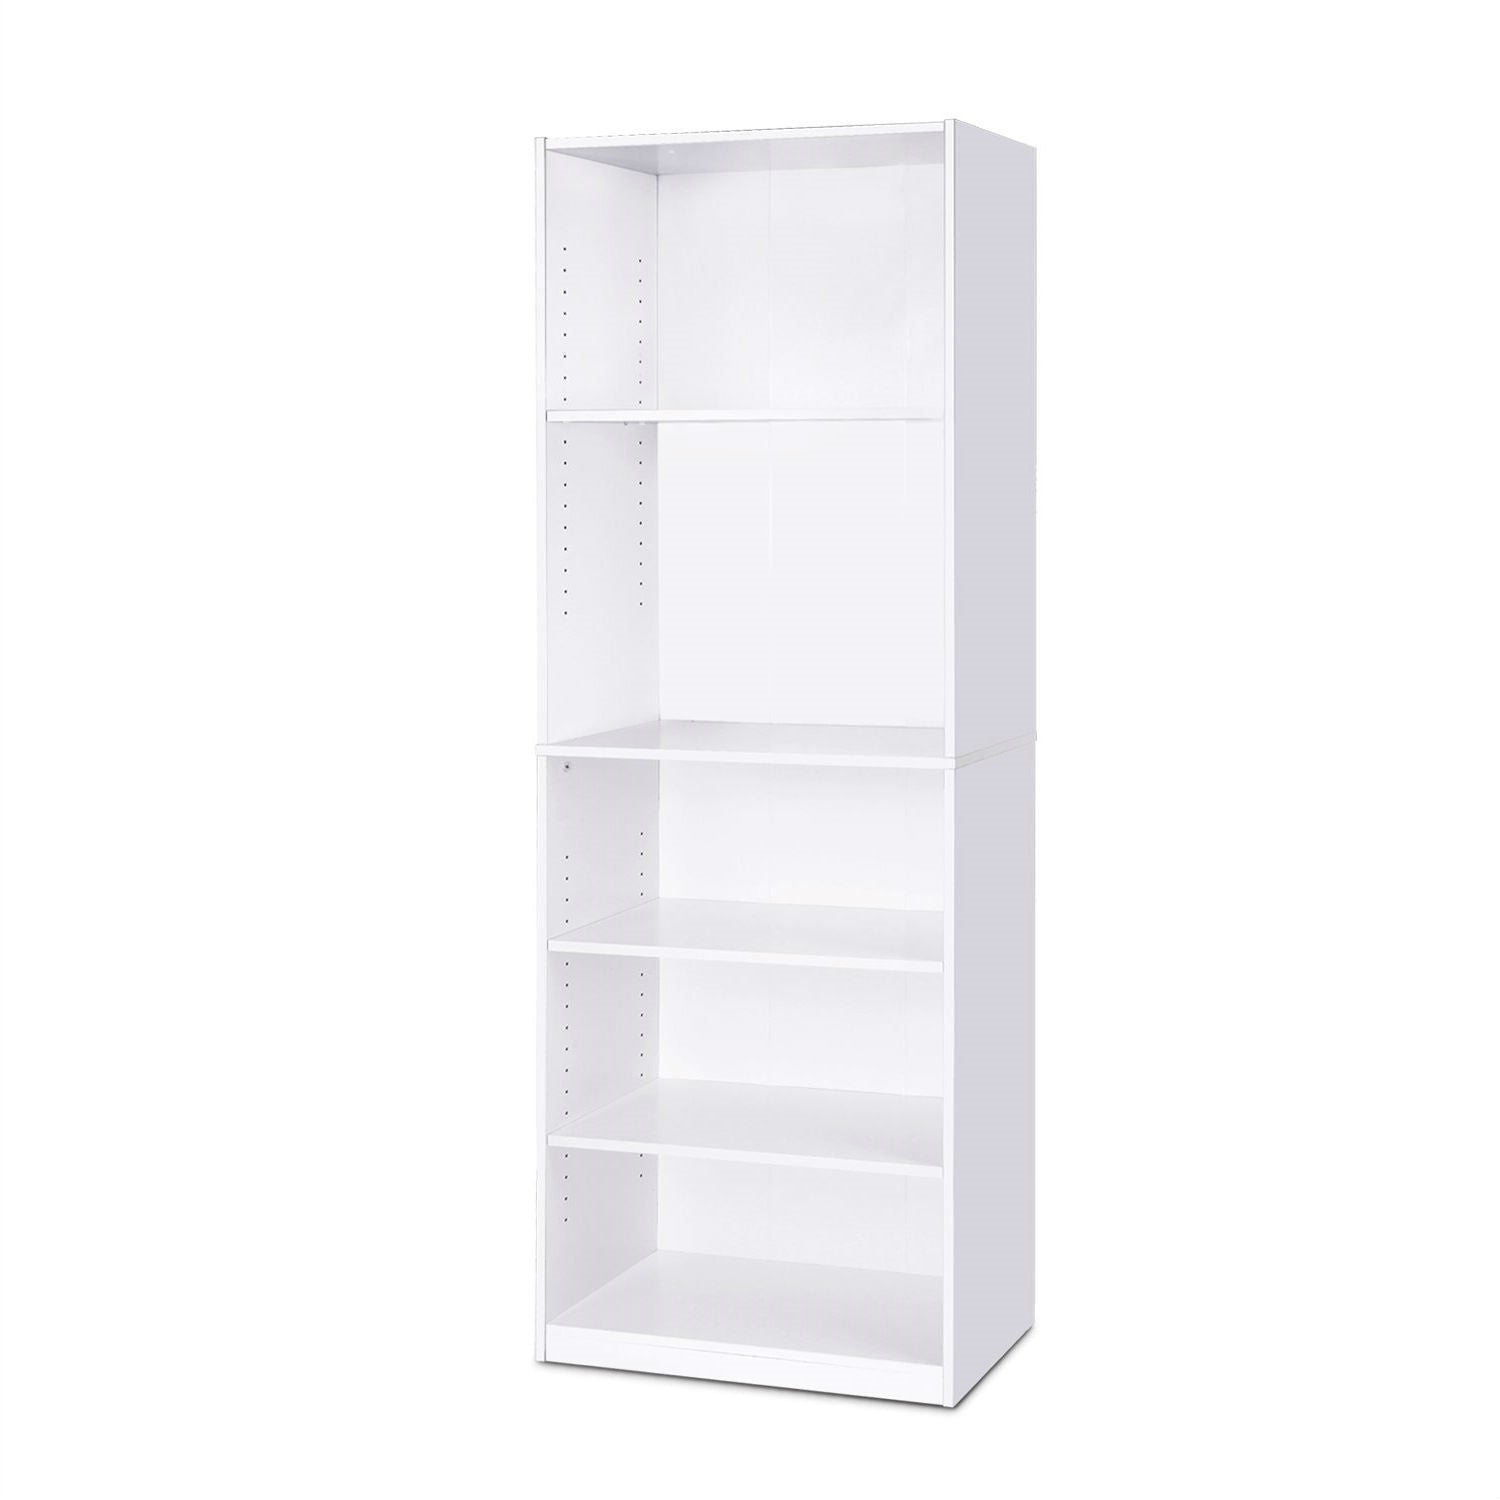 Living Room > Bookcases - Modern 5-Shelf Bookcase In White Wood Finish